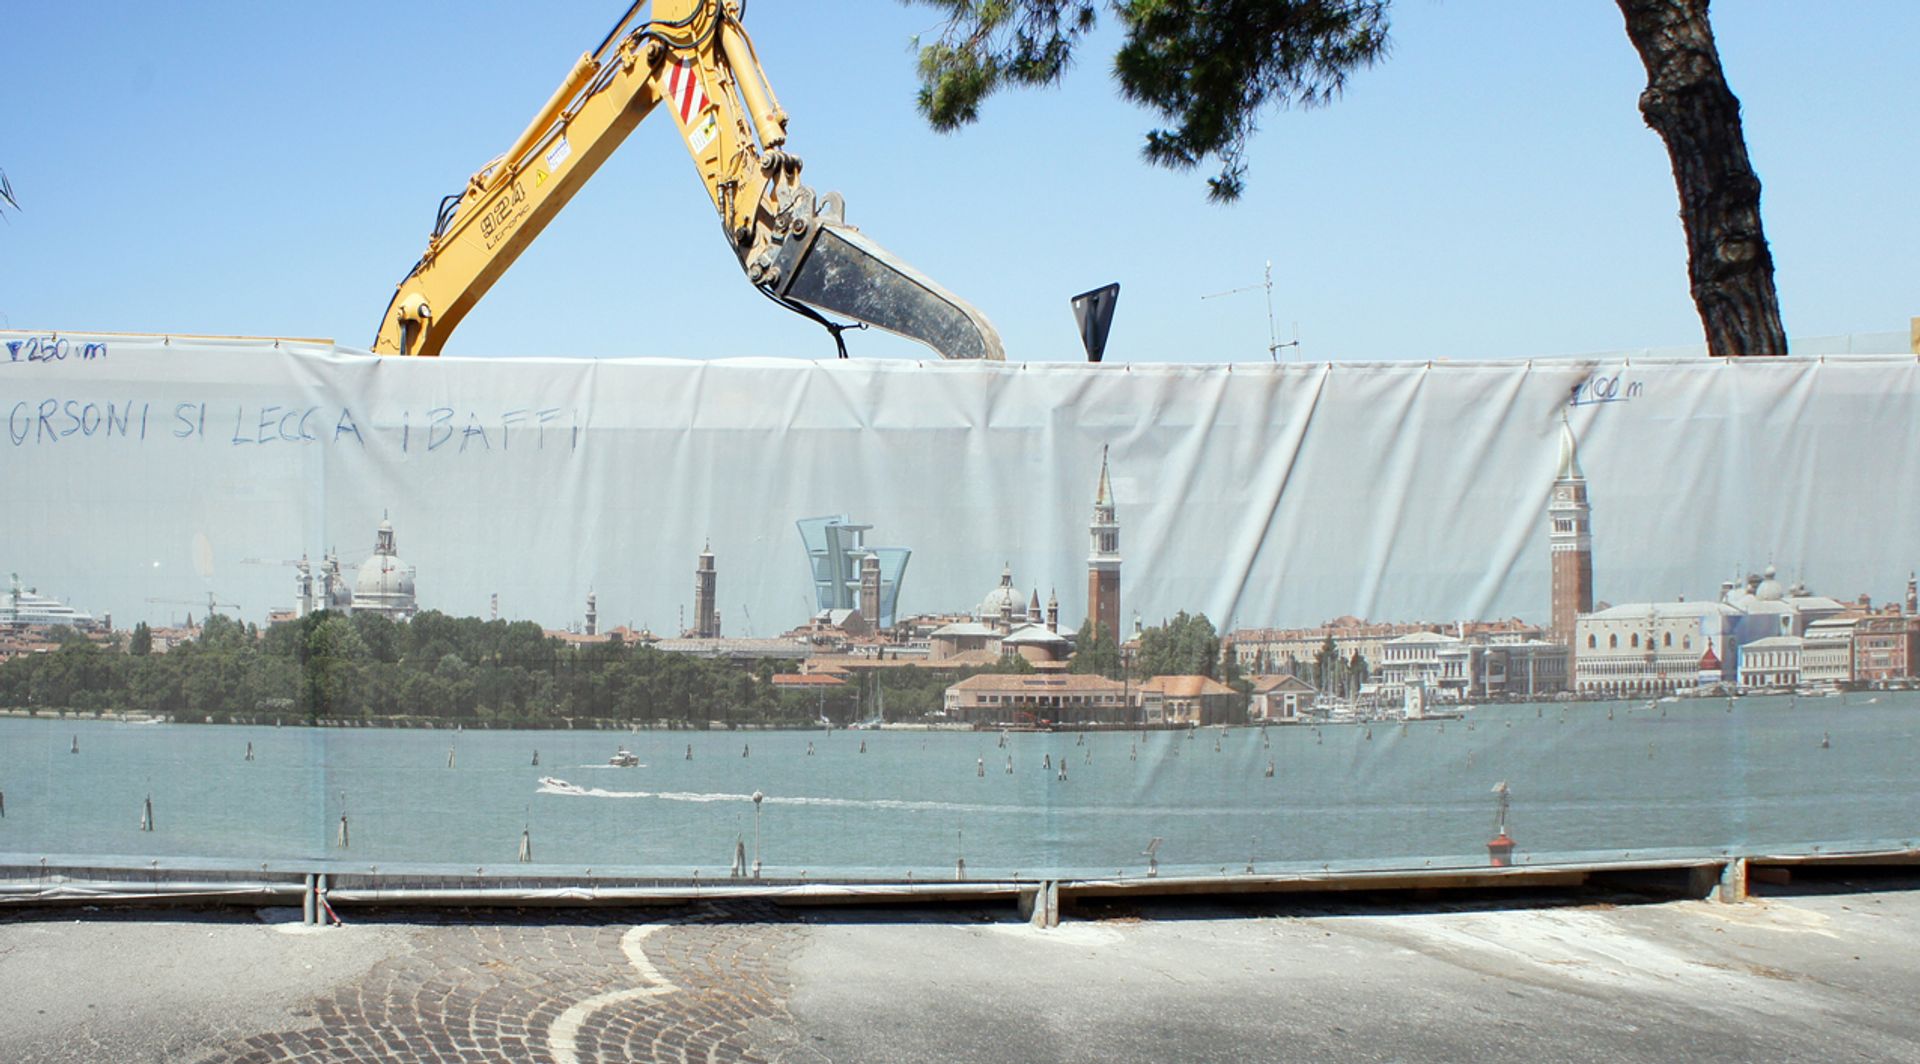 A photomontage of what the “Tower of Light” proposed by Pierre Cardin for the mainland behind Venice would have looked like from the Lido.  This 2013 project was supported by the then mayor of the city, Giorgio Orsoni. Fortunately, it was withdrawn, although not quite killed Photomontage and photo by Leo Schubert